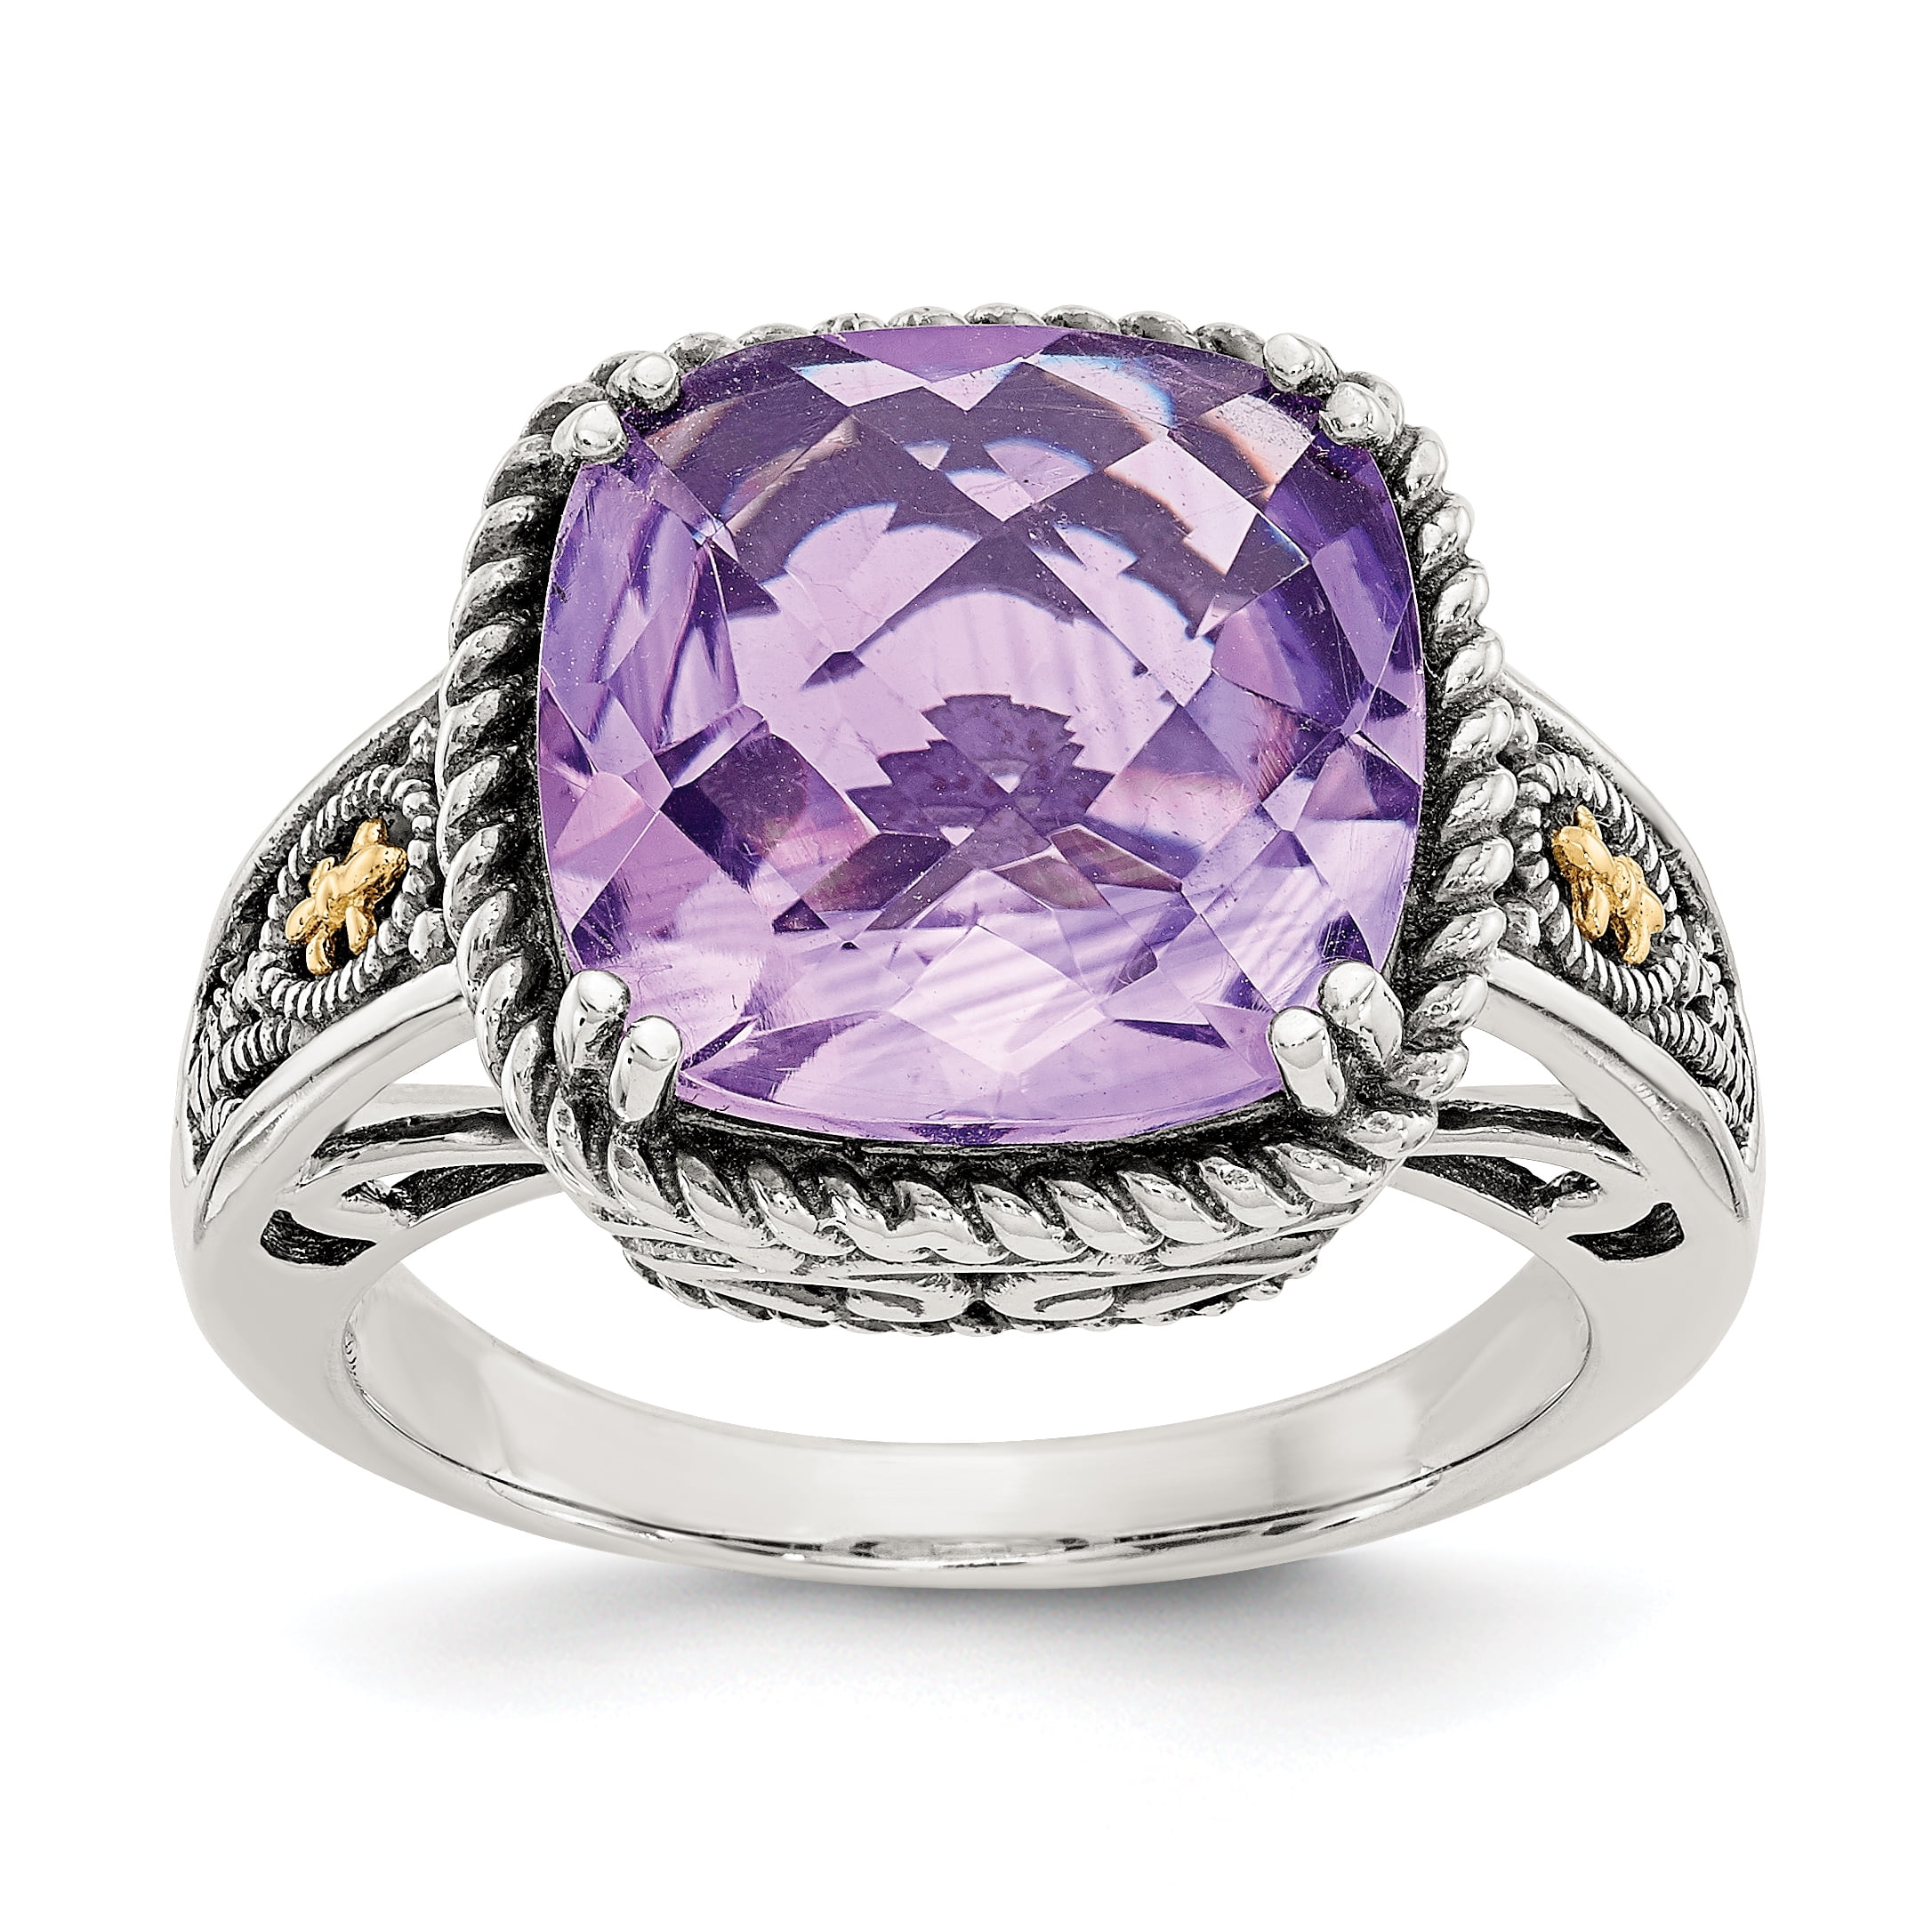 IceCarats 925 Sterling Silver 14k Purple Amethyst Band